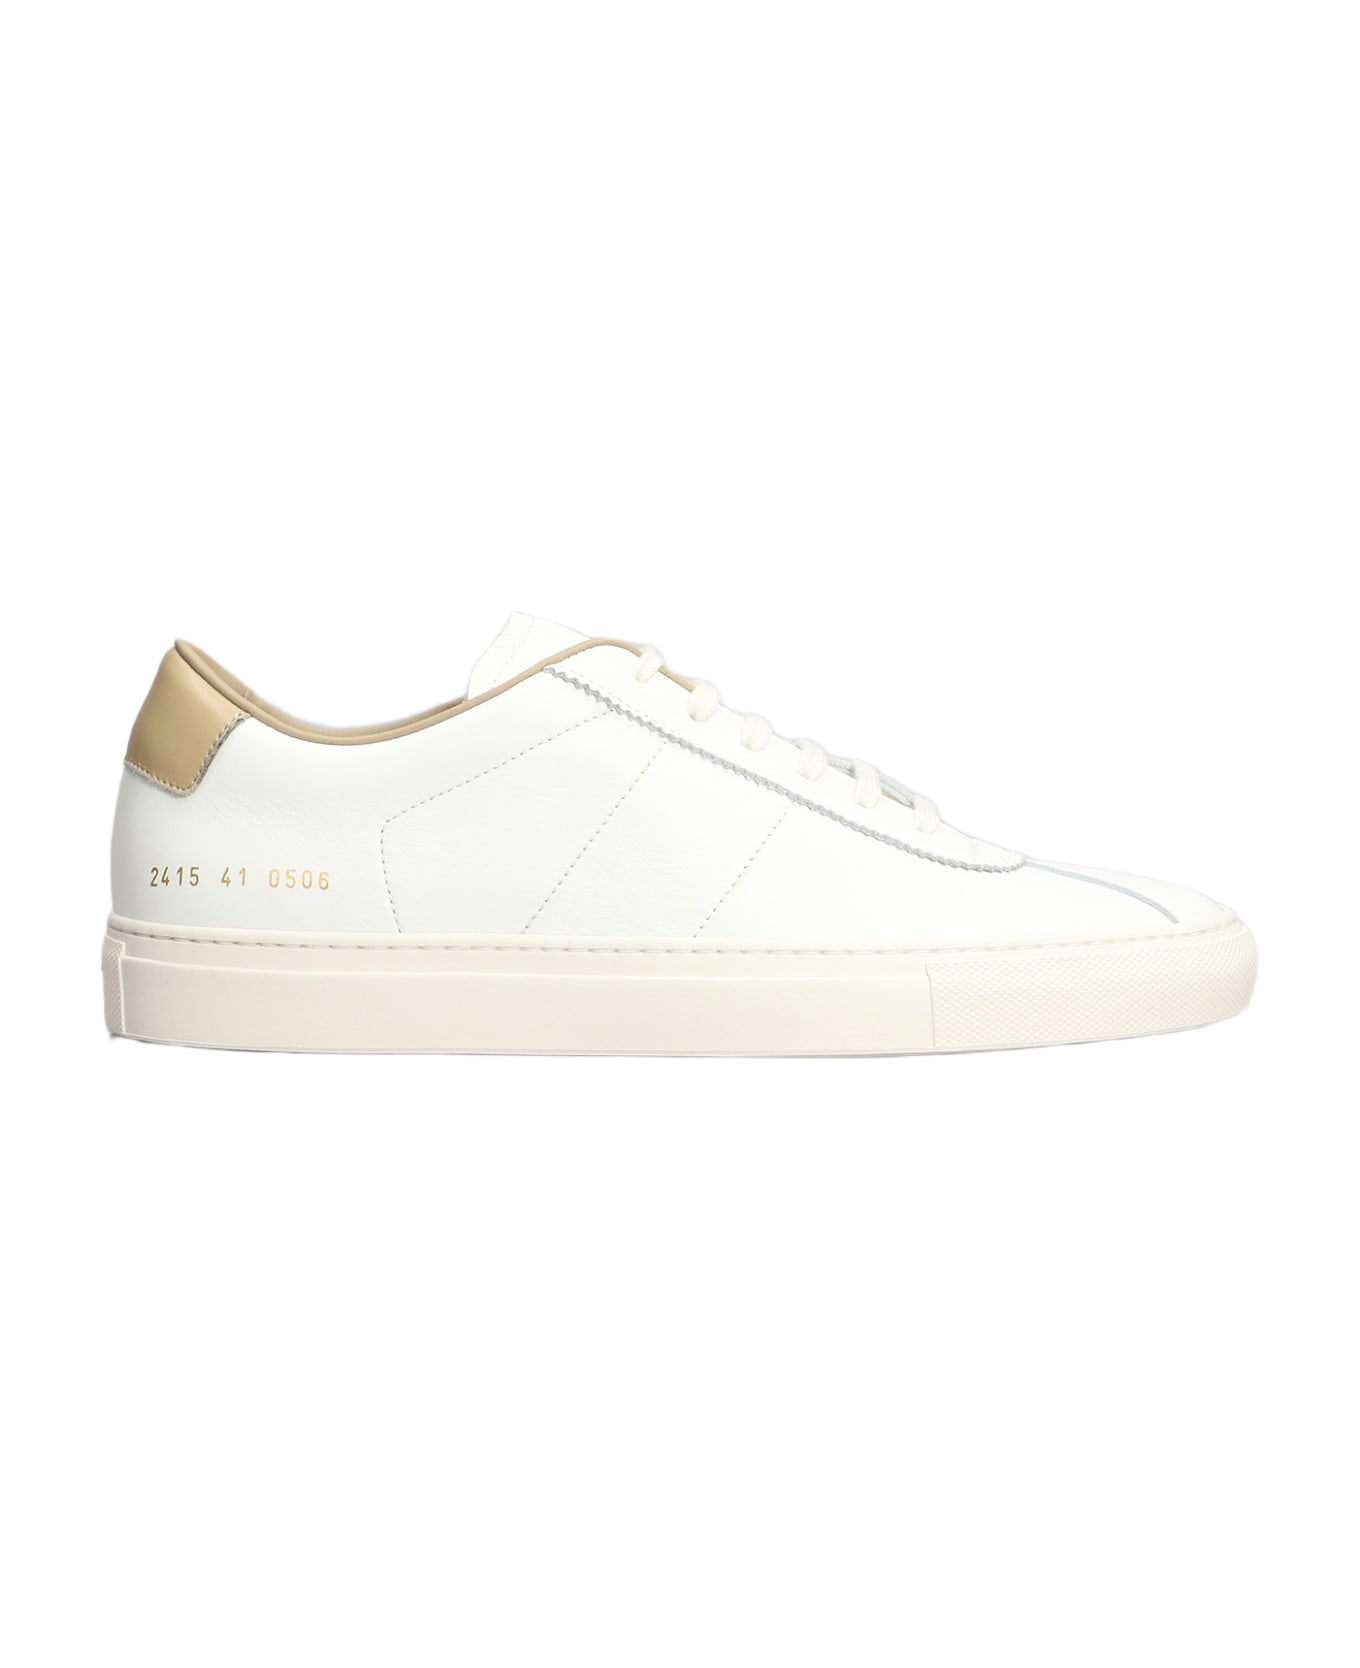 Common Projects Tennis 70 Sneakers - white